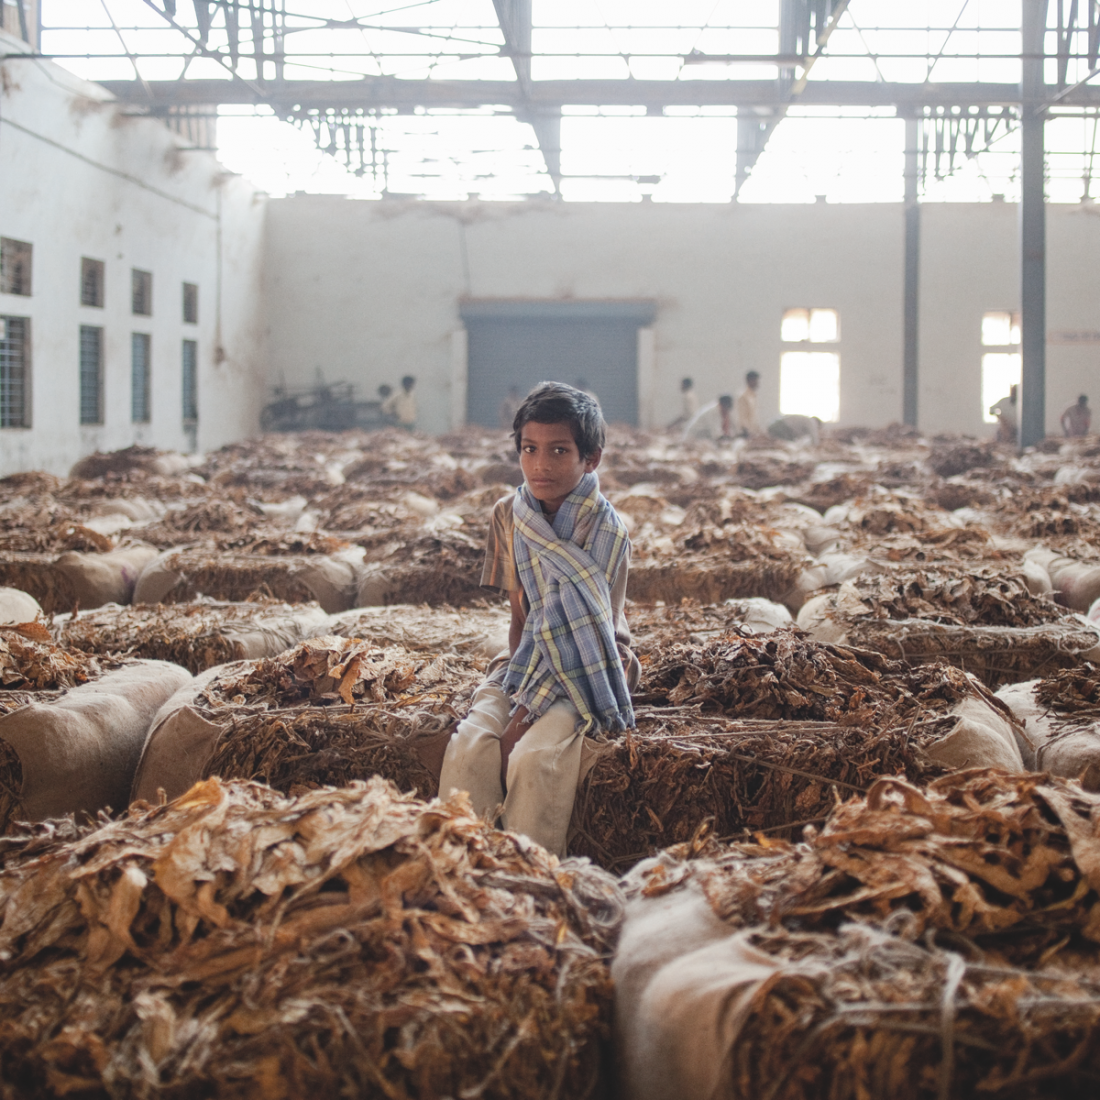 Periyapatna, India A farmer’s child sitting on a tobacco bale on the floor of a tobacco auction house. ? Rocco Rorandelli